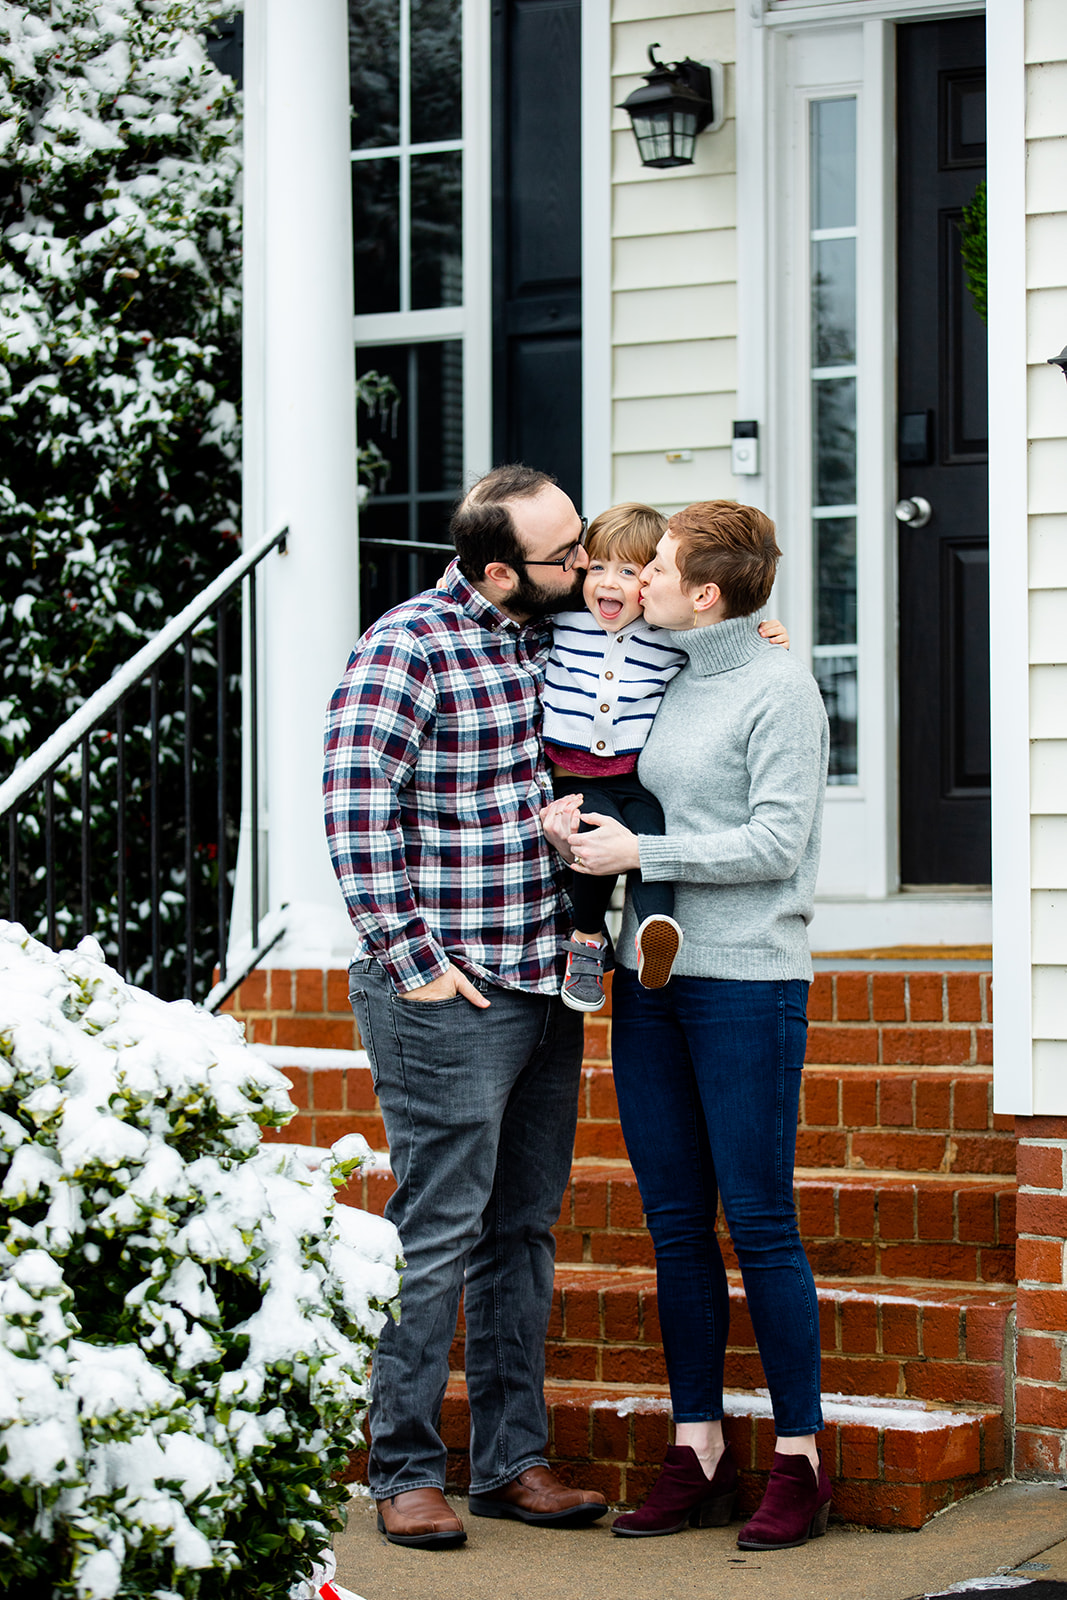 Snowy Valentines Day Front Porch Sessions - Image Property of www.j-dphoto.com